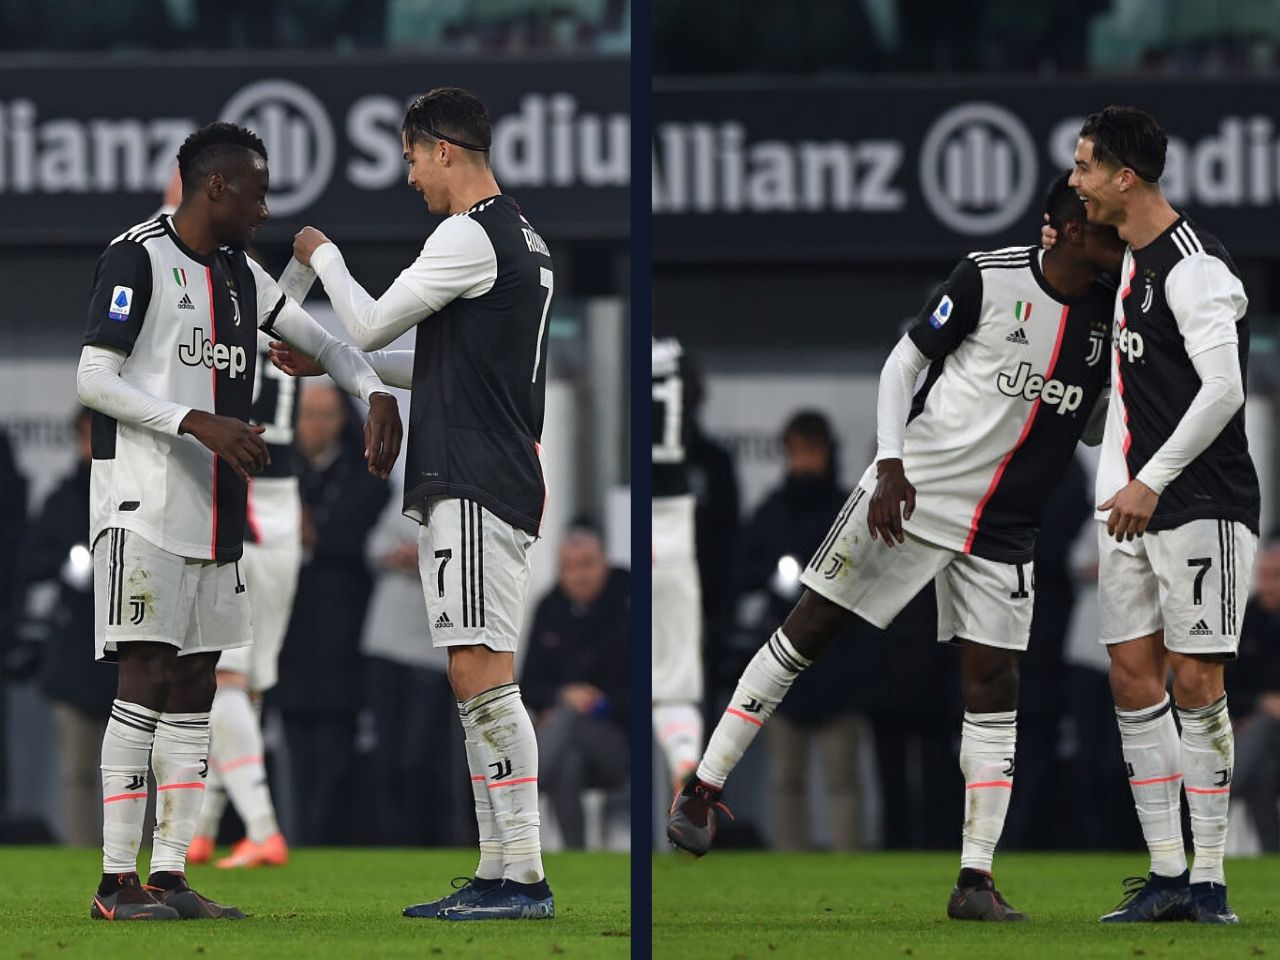 TOP MAN Humble Cristiano Ronaldo is handed Juventus captain’s armband… but gives it to Matuidi as he’s been there longer - Bóng Đá